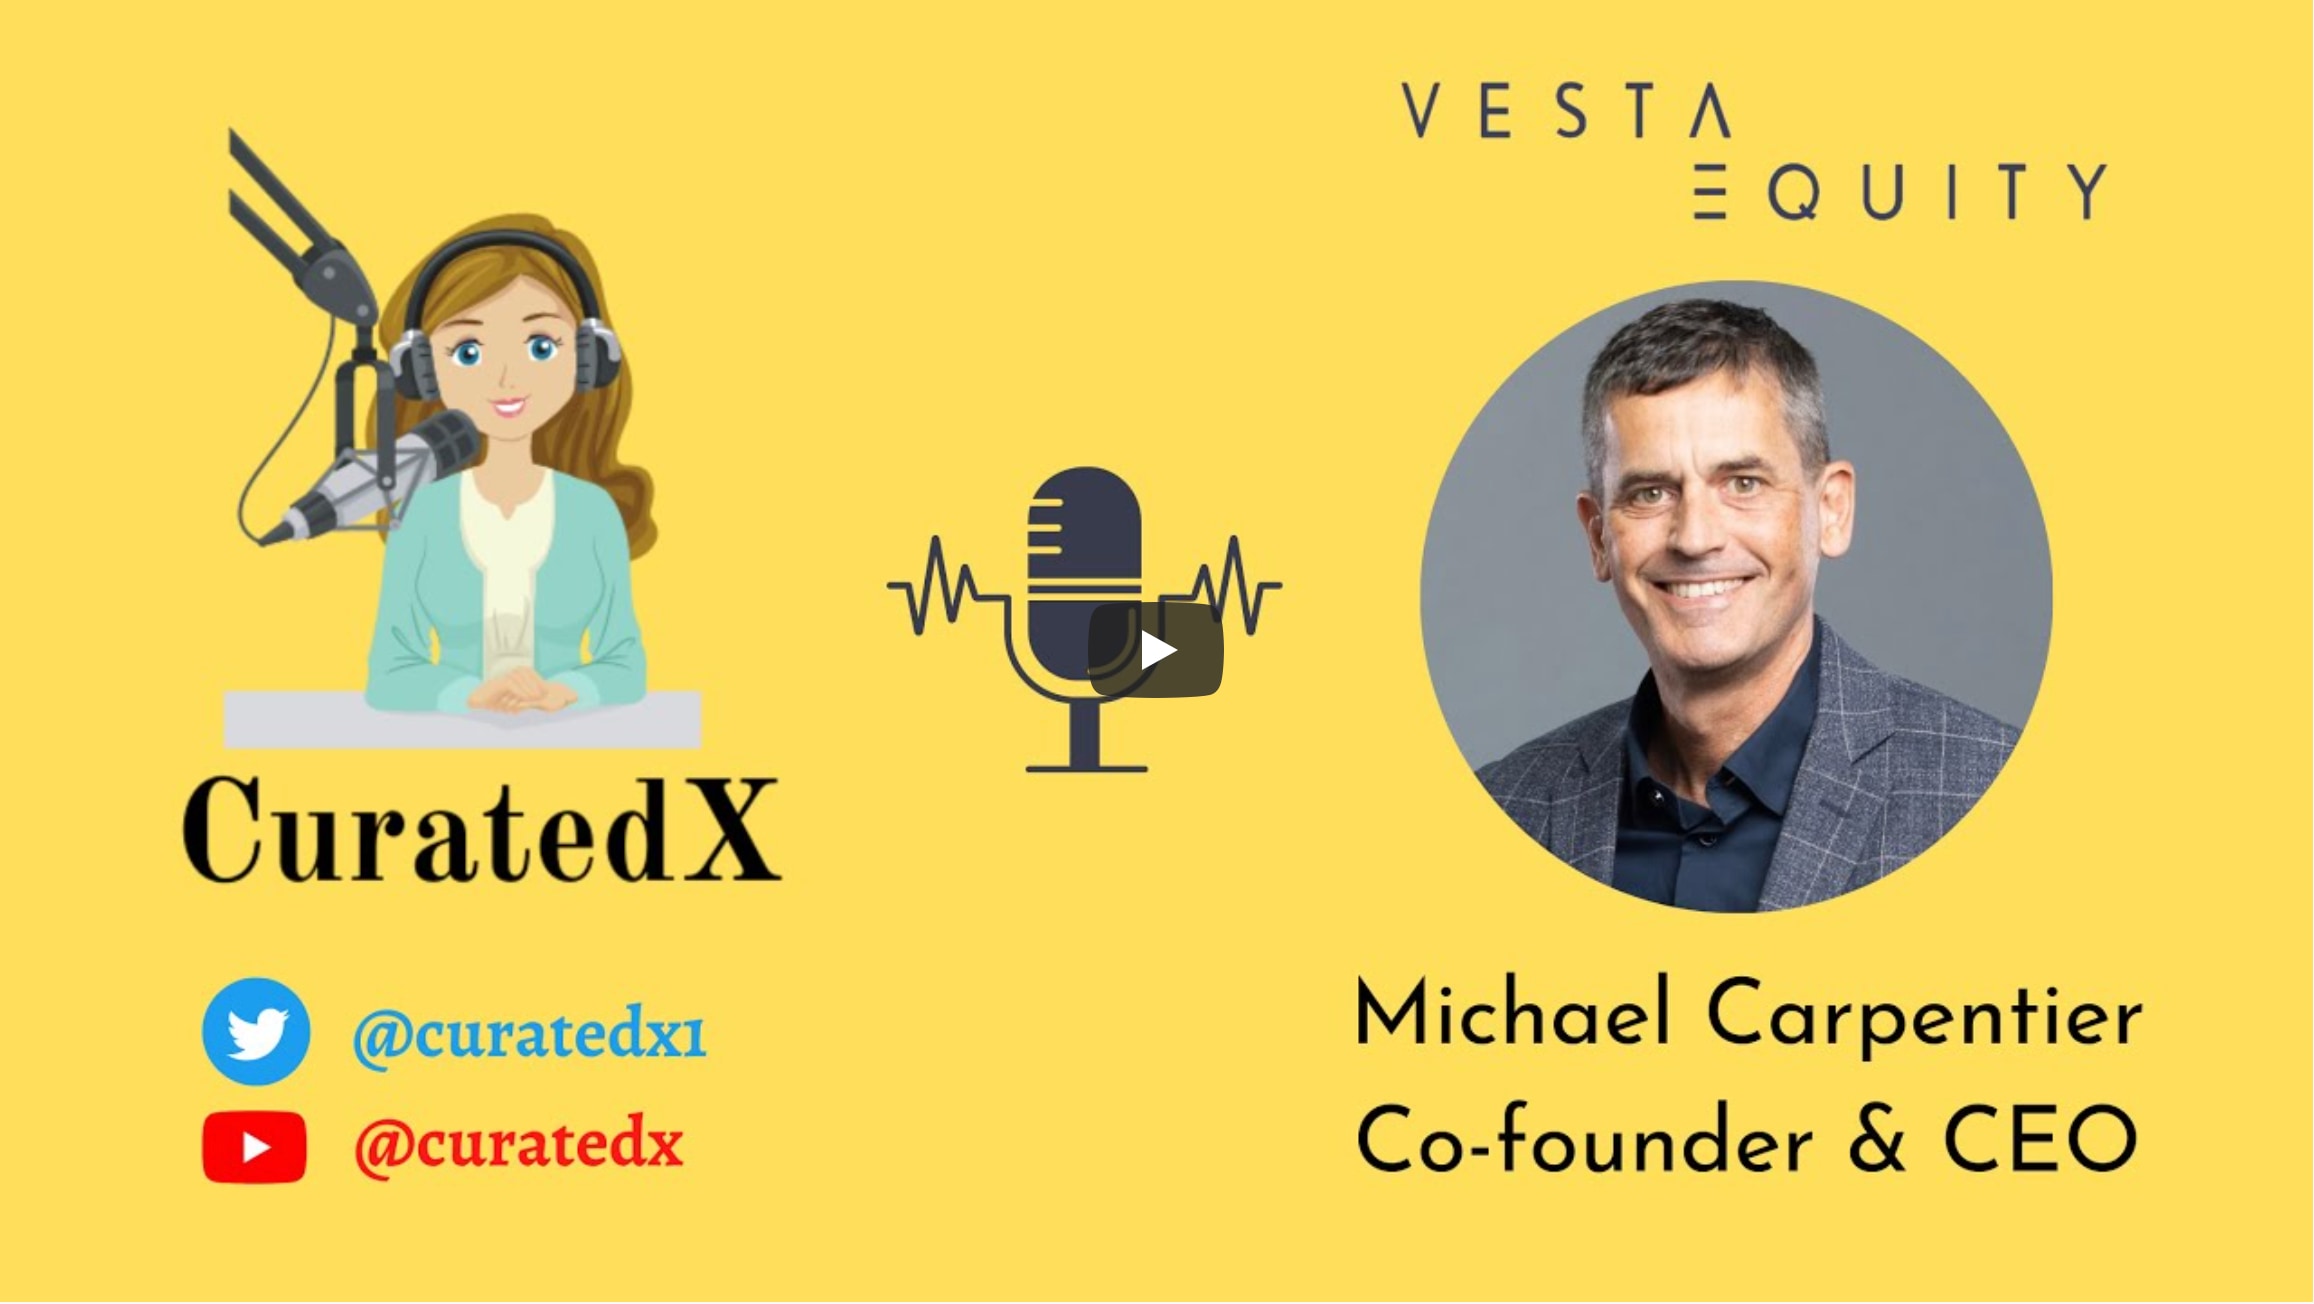 CuratedX Podcast : An Interview with Michael Carpentier of Vesta Equity